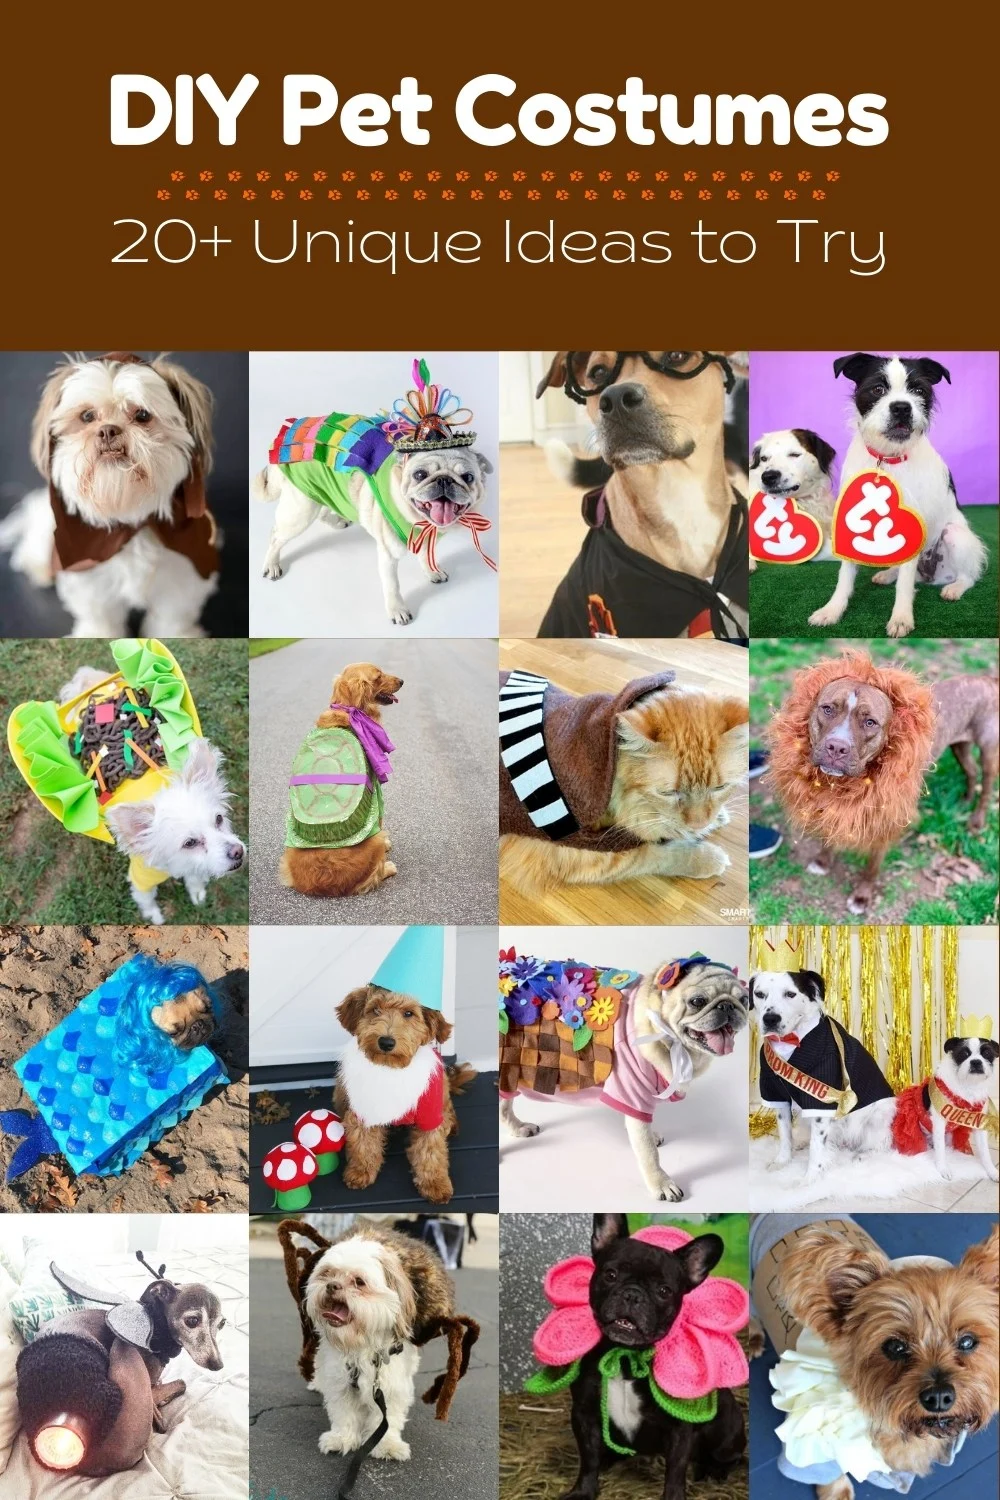 The Best Halloween Costumes for Dogs in 2022